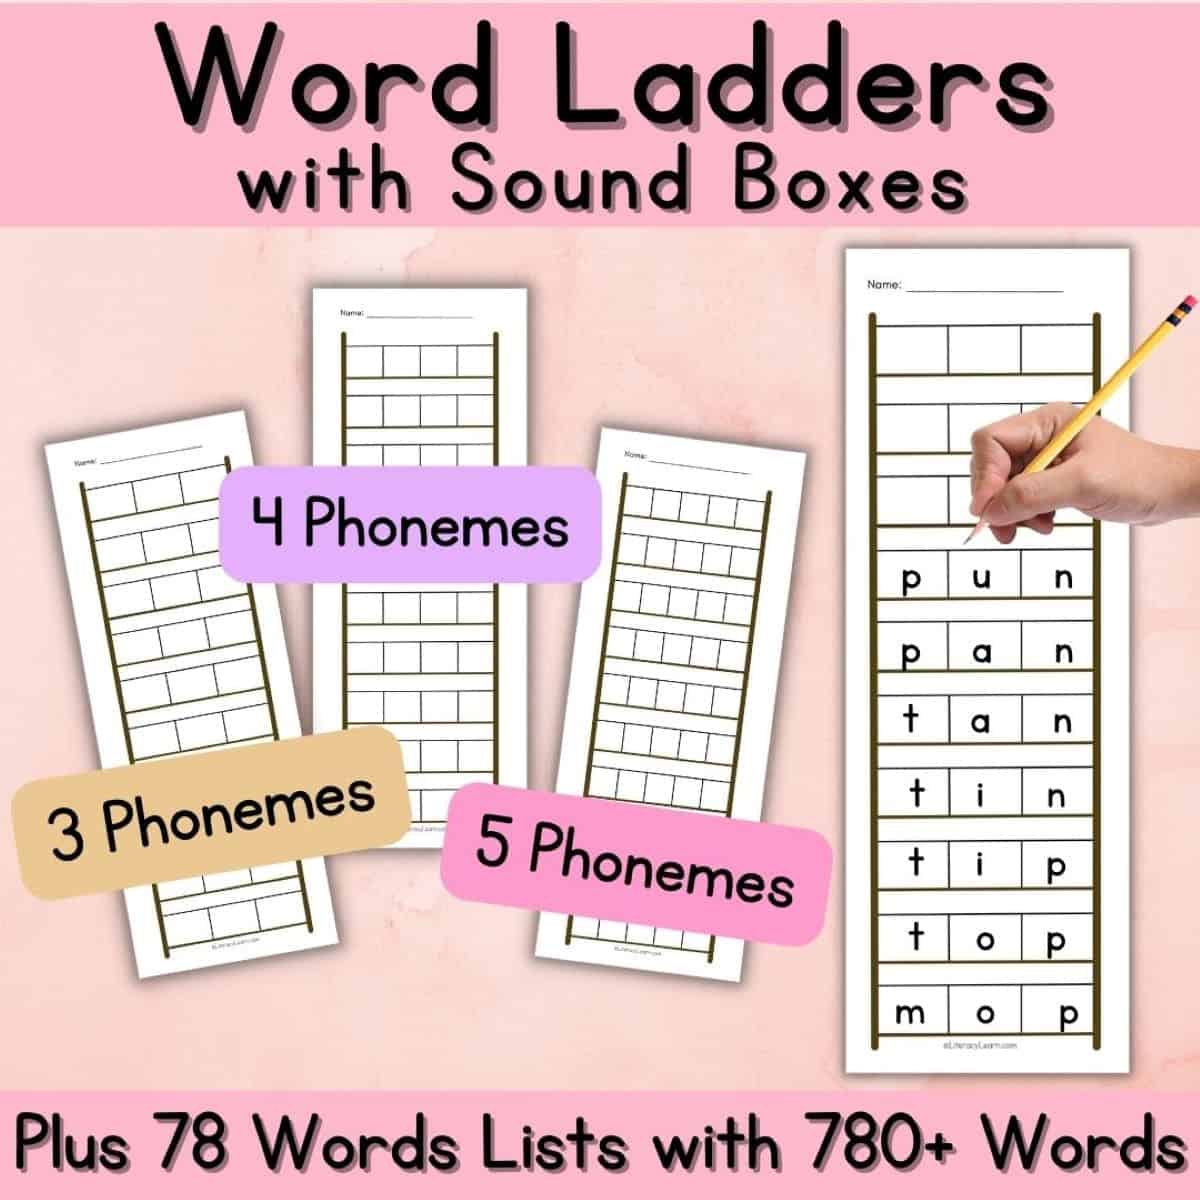 Pink graphic showing a word ladder example and sound boxes for 3, 4, and 5 phoneme words.